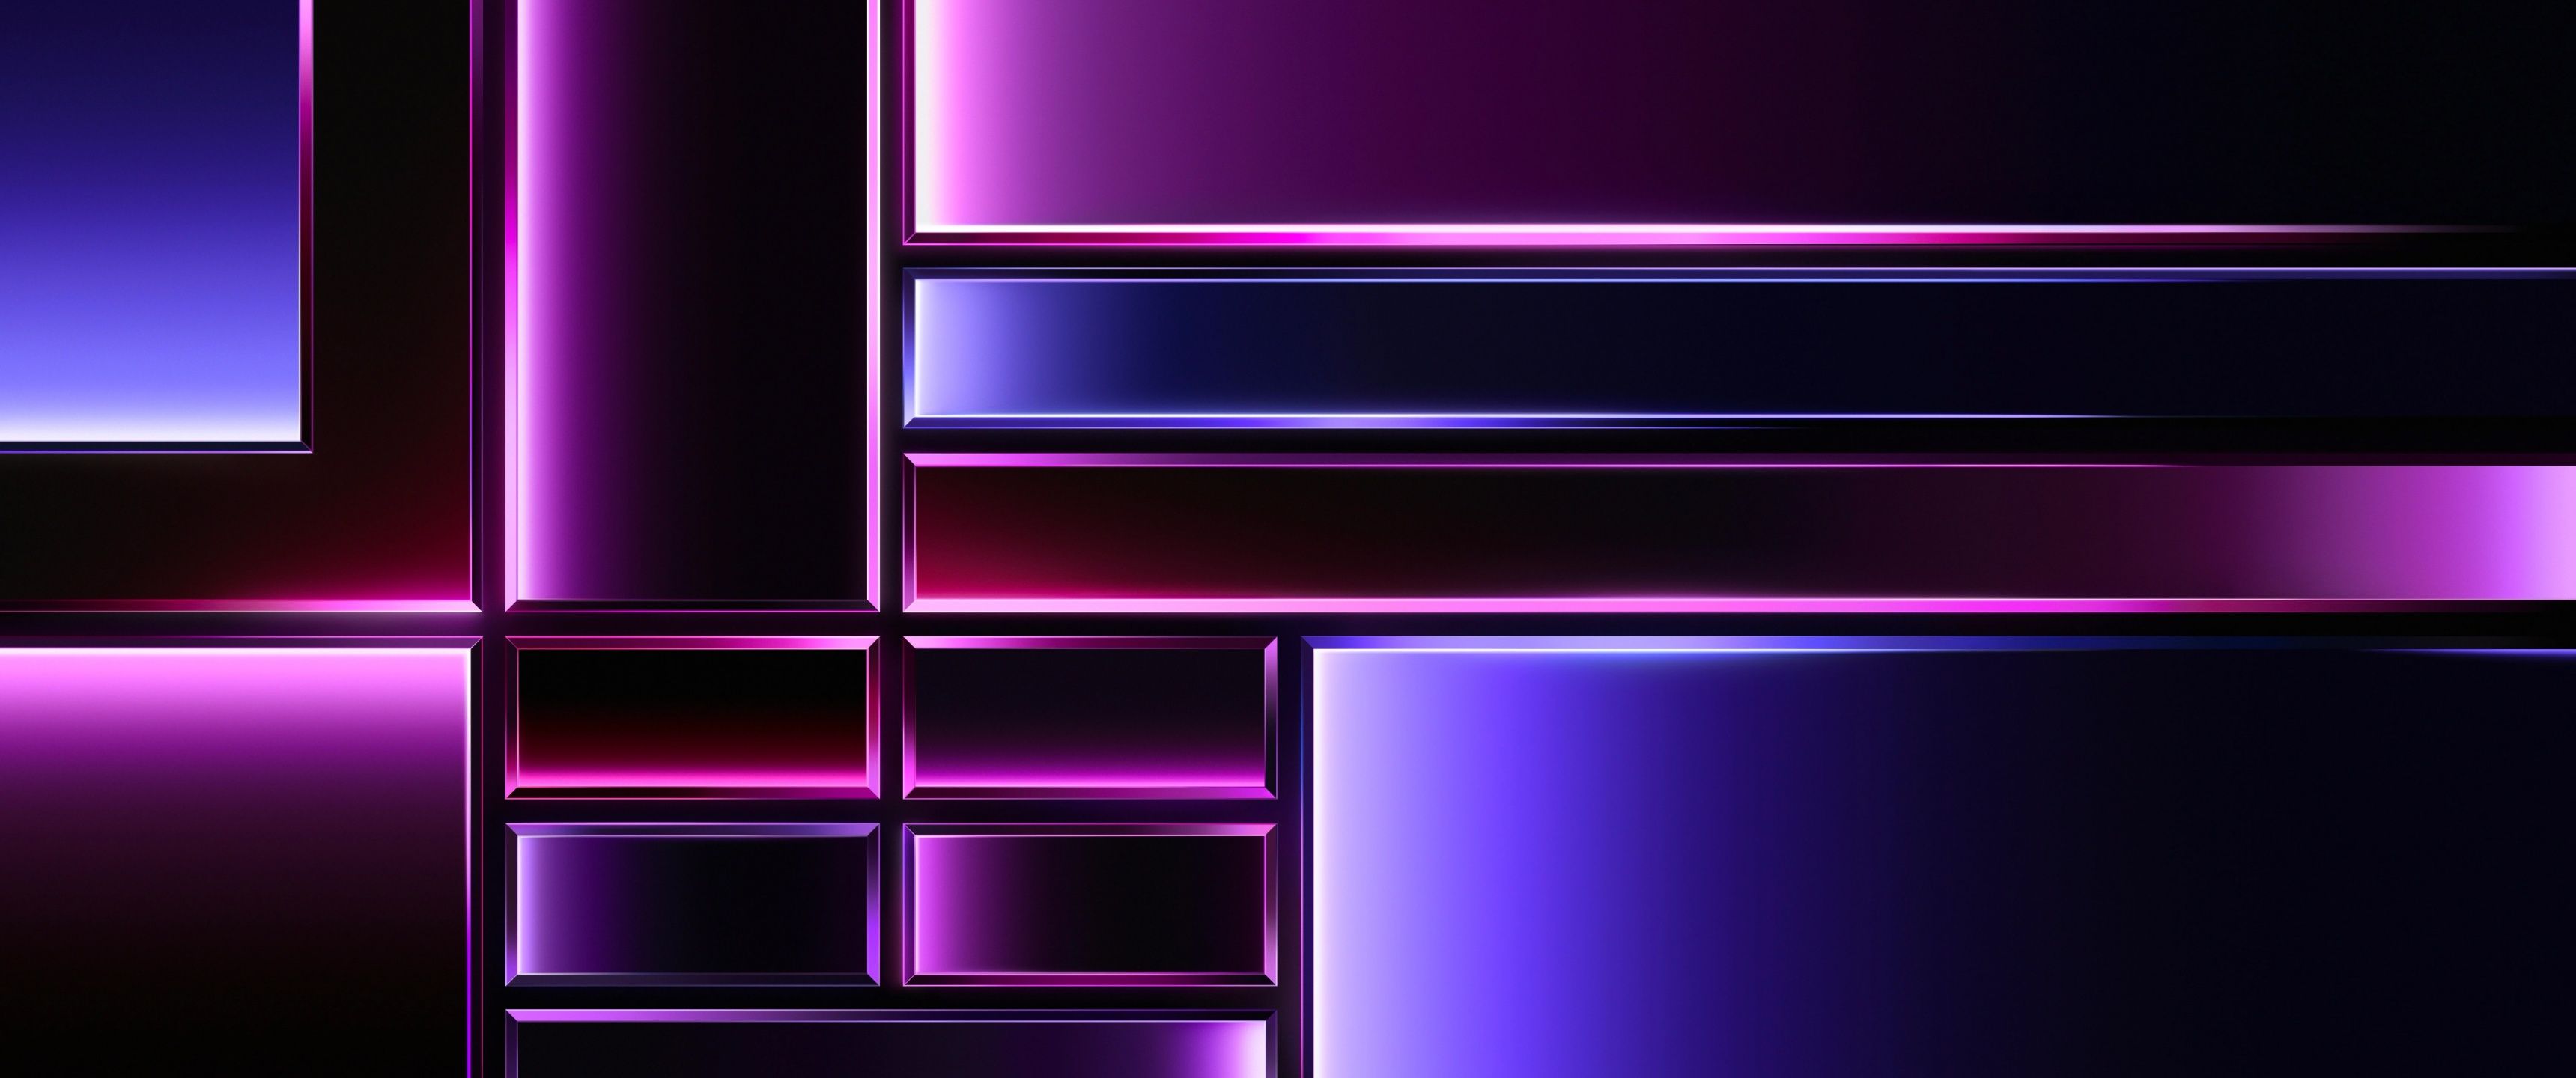 A purple and black wallpaper with squares - 3440x1440